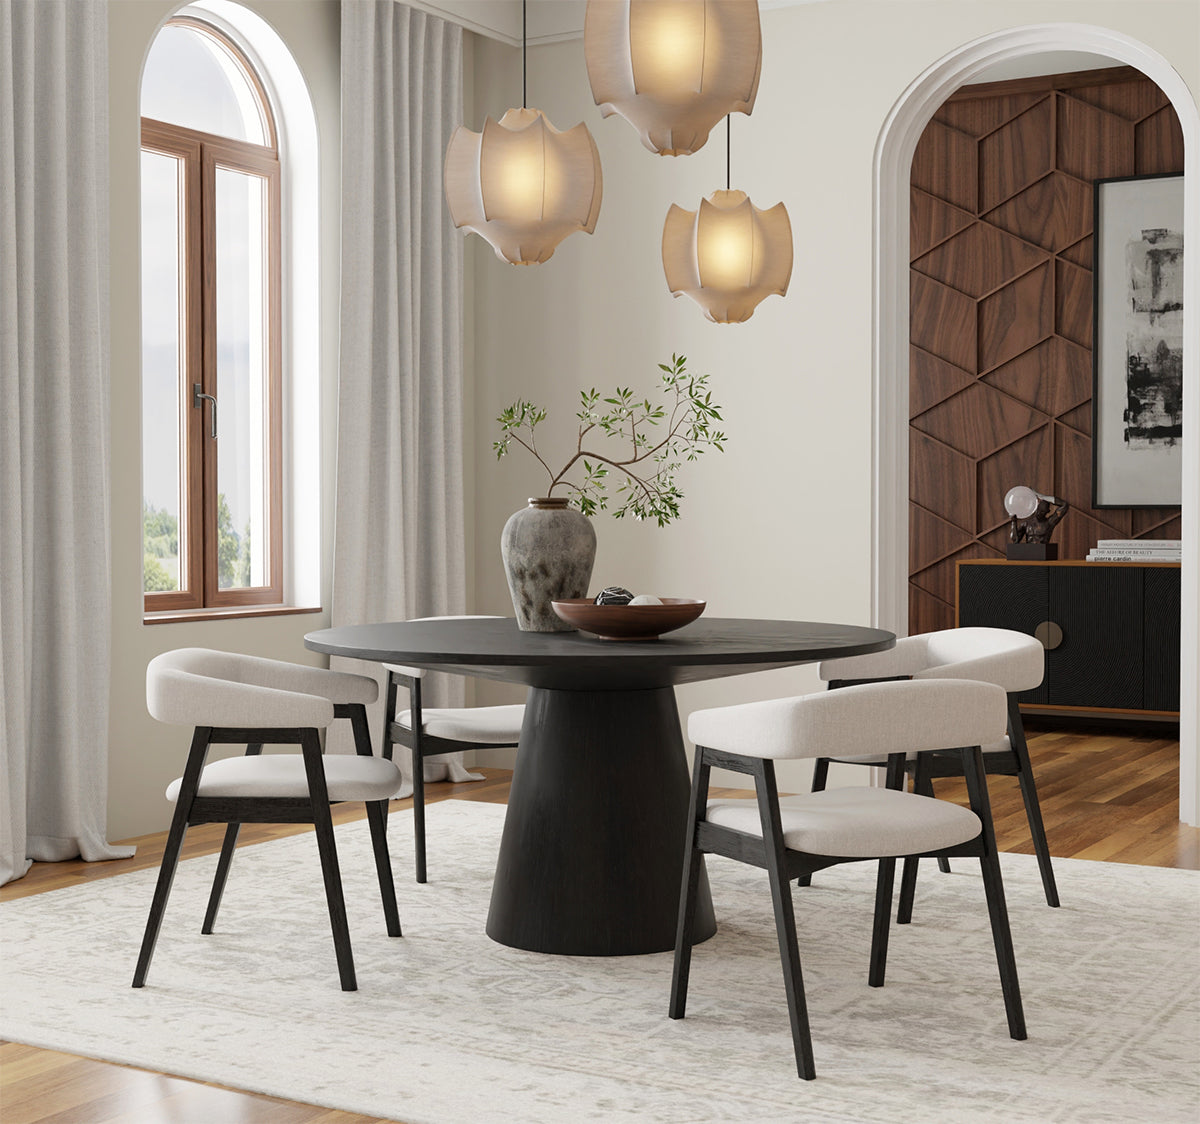 Alpine-Cove Round Dining Table Set For 4